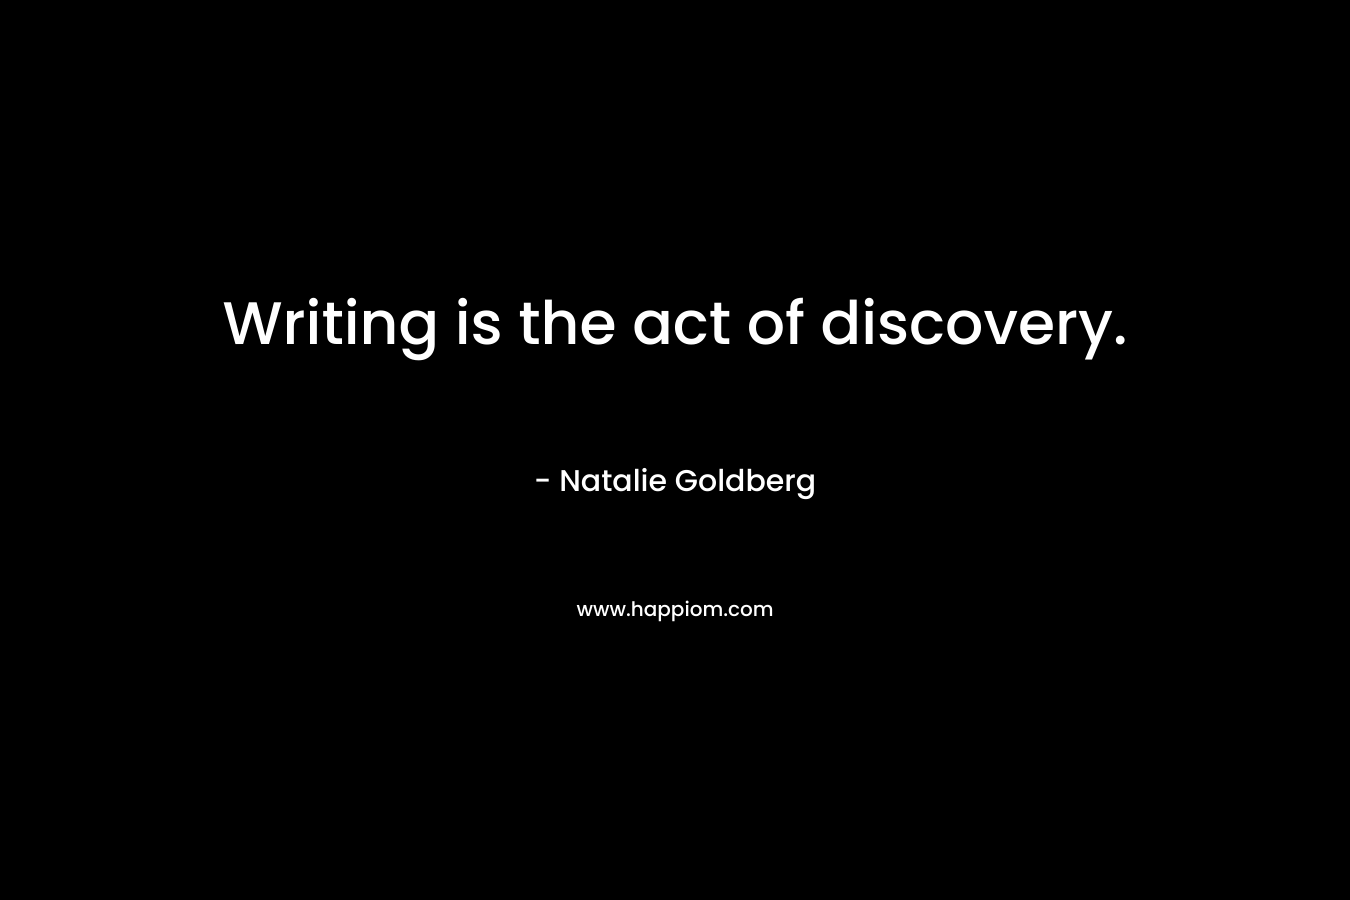 Writing is the act of discovery. – Natalie Goldberg